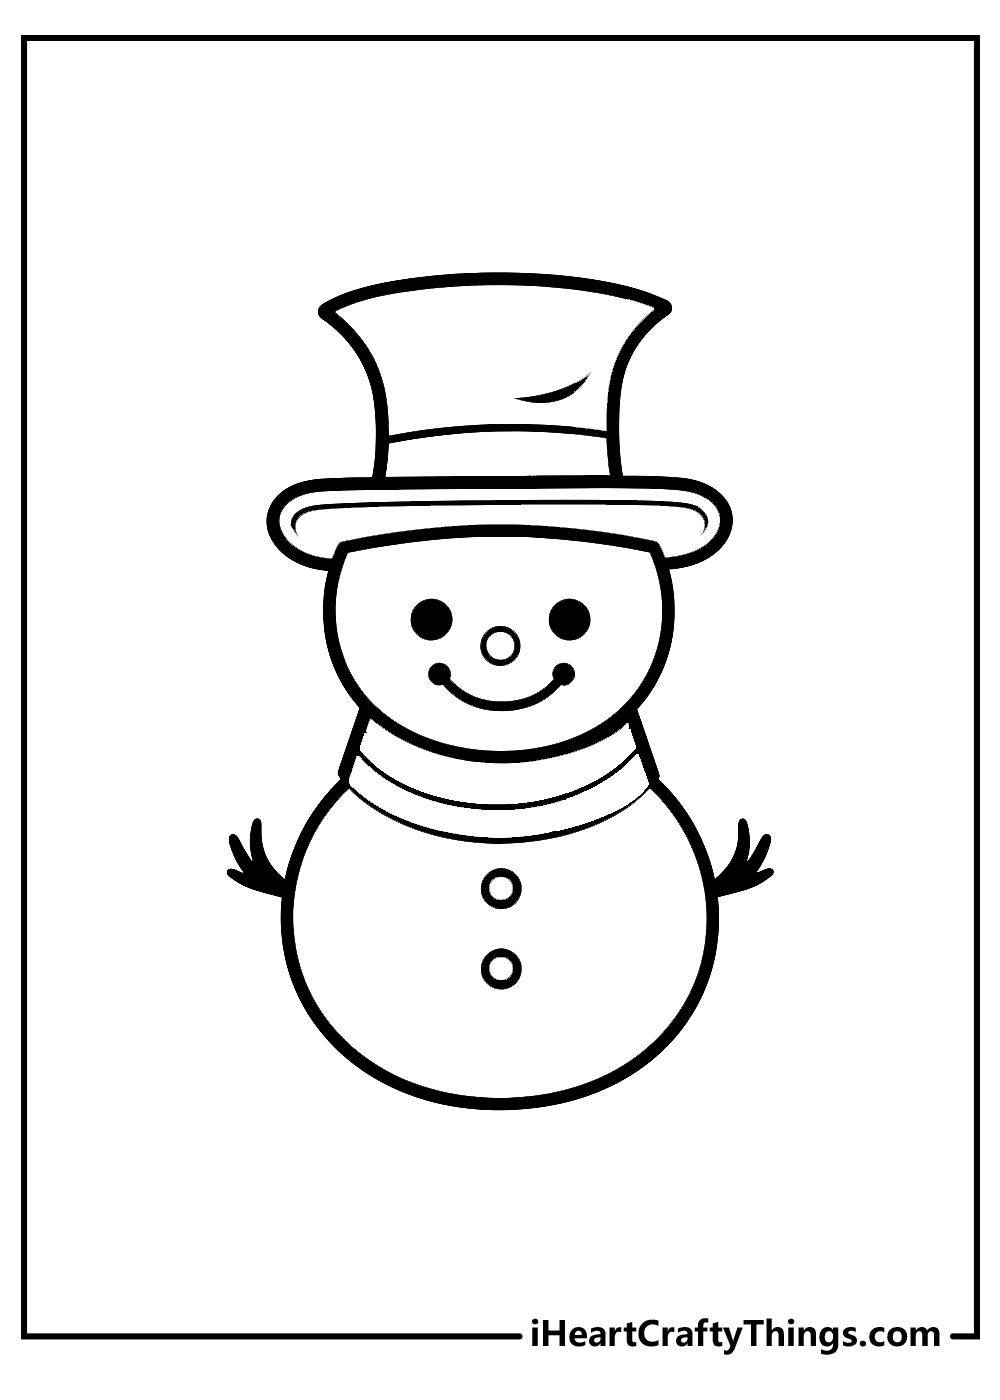 black-and-white snowman coloring pages